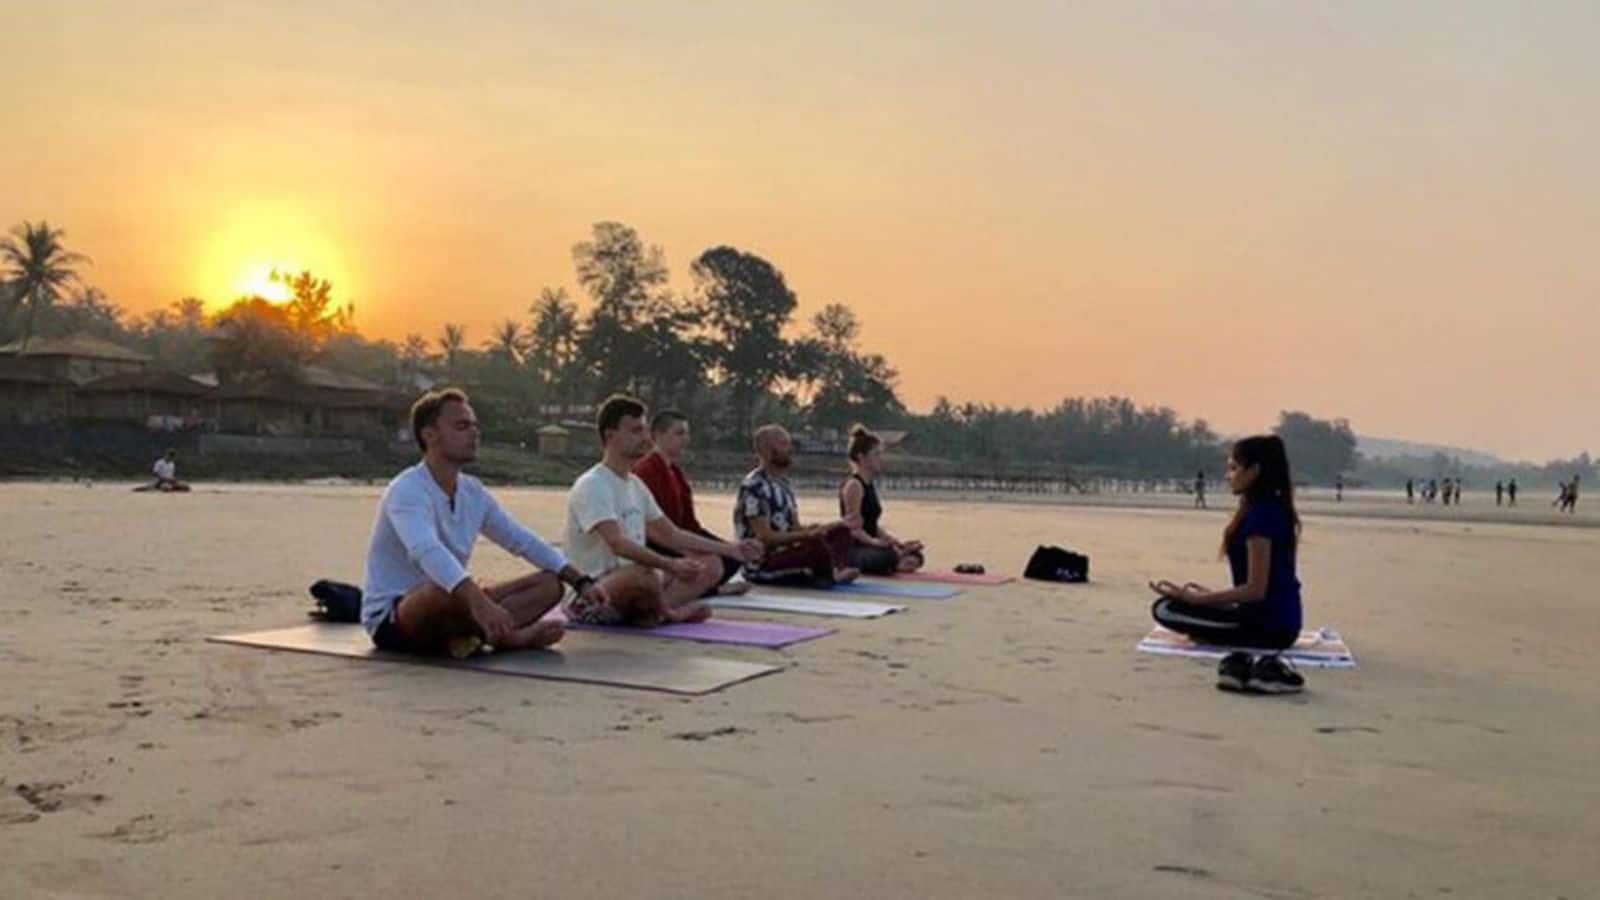 Head over to Mumbai's tranquil beach yoga escapes